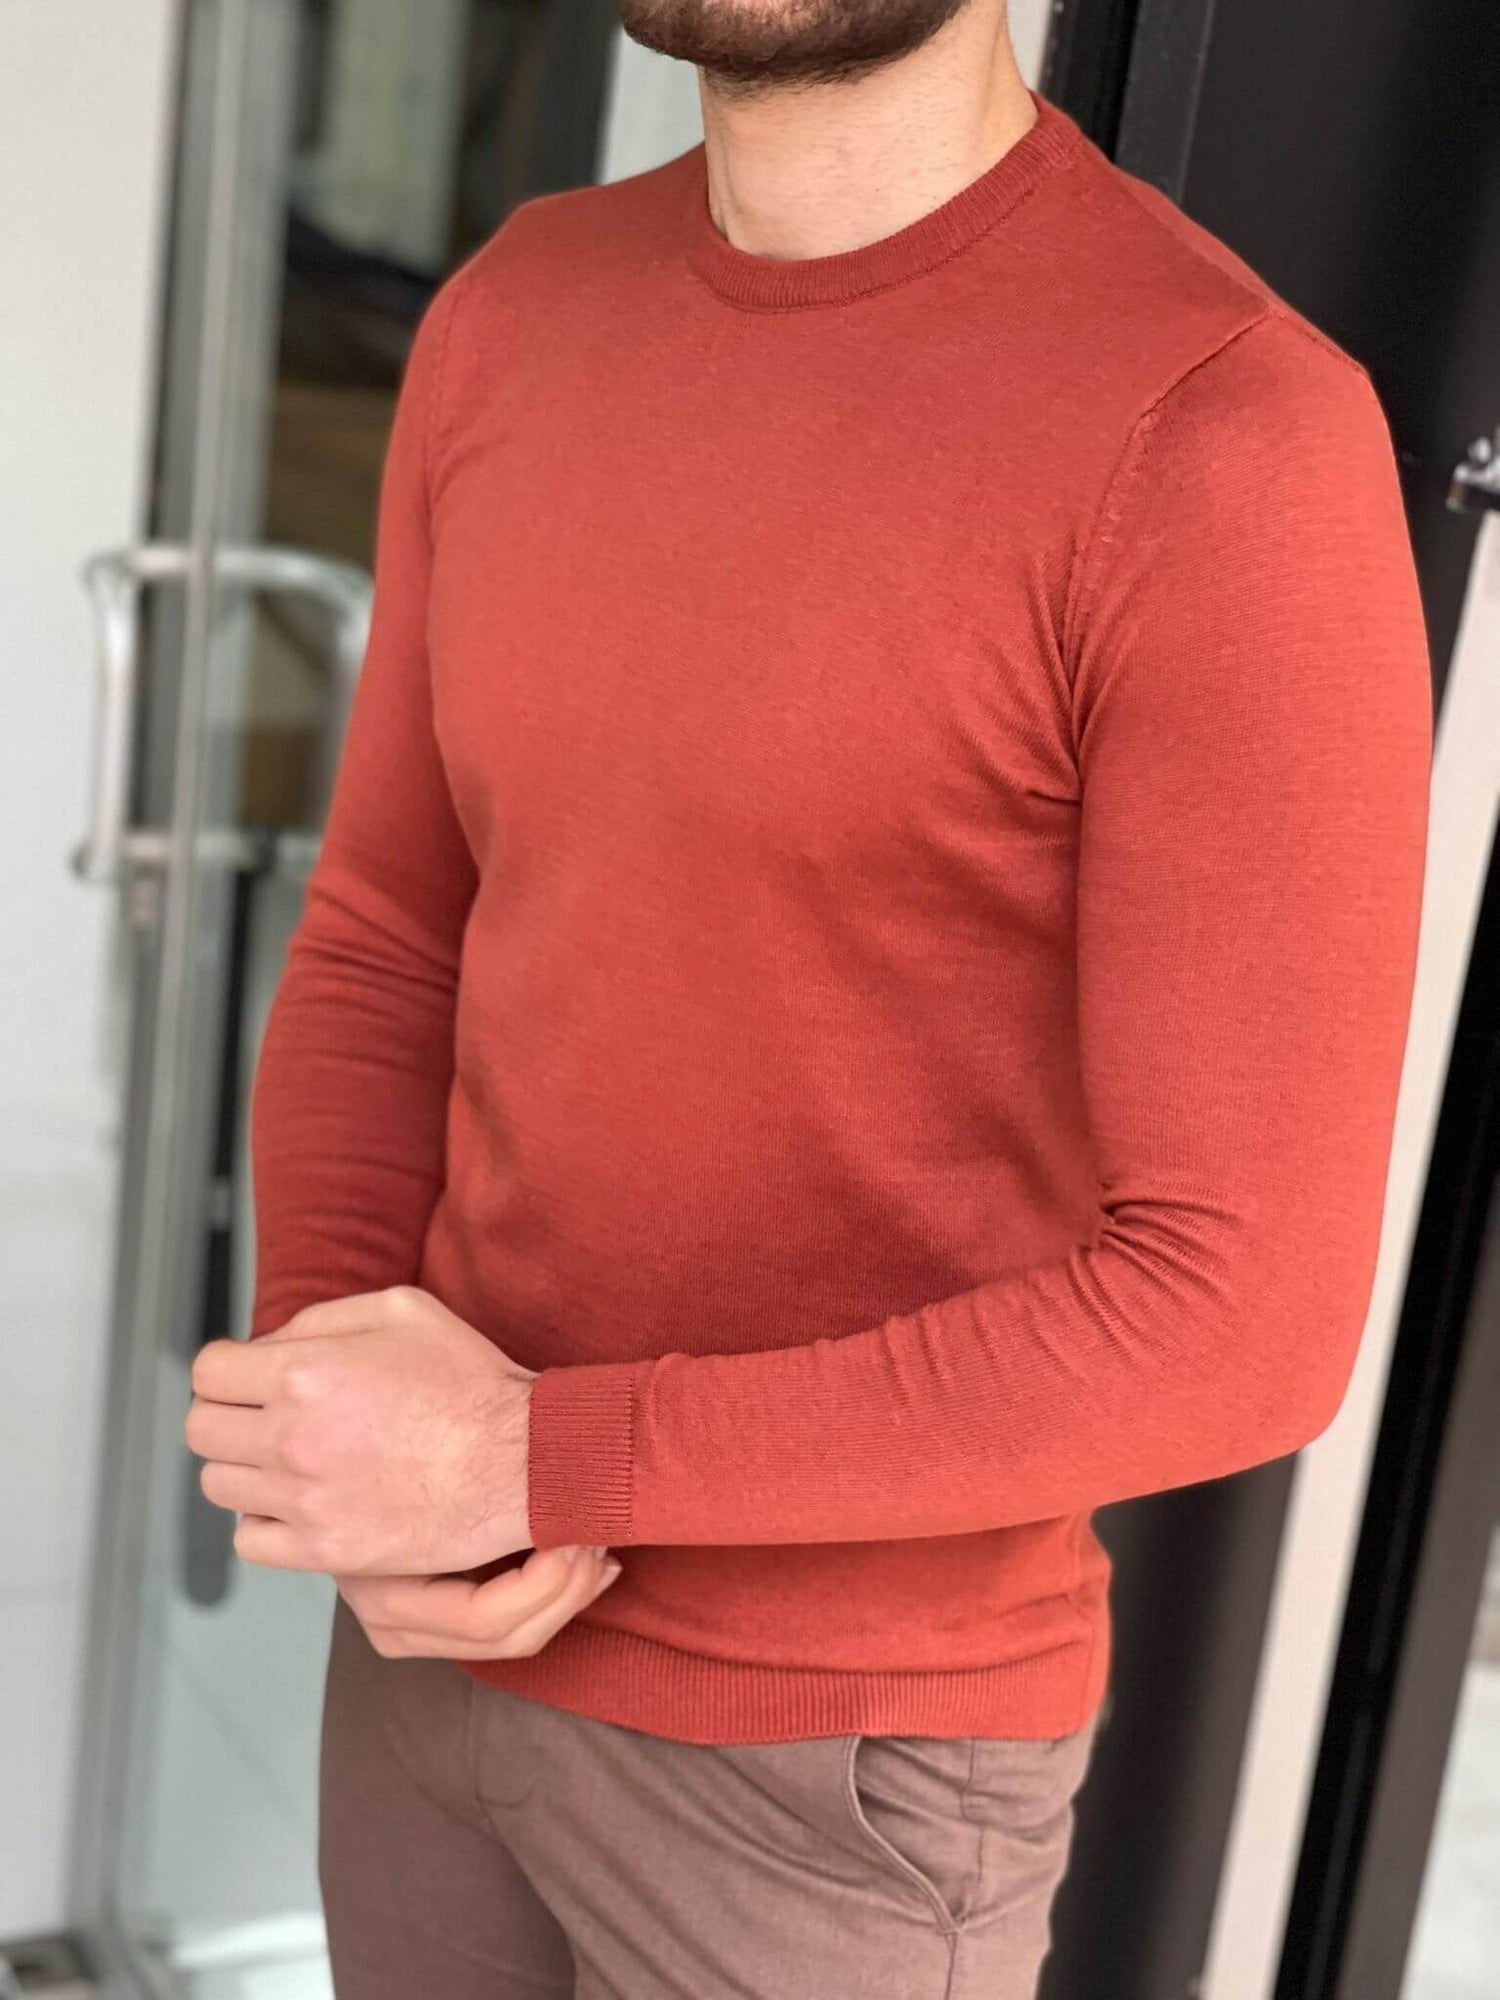 A cozy crewneck sweater in a textured tile pattern, featuring a blend of warm colors and a soft knit fabric."